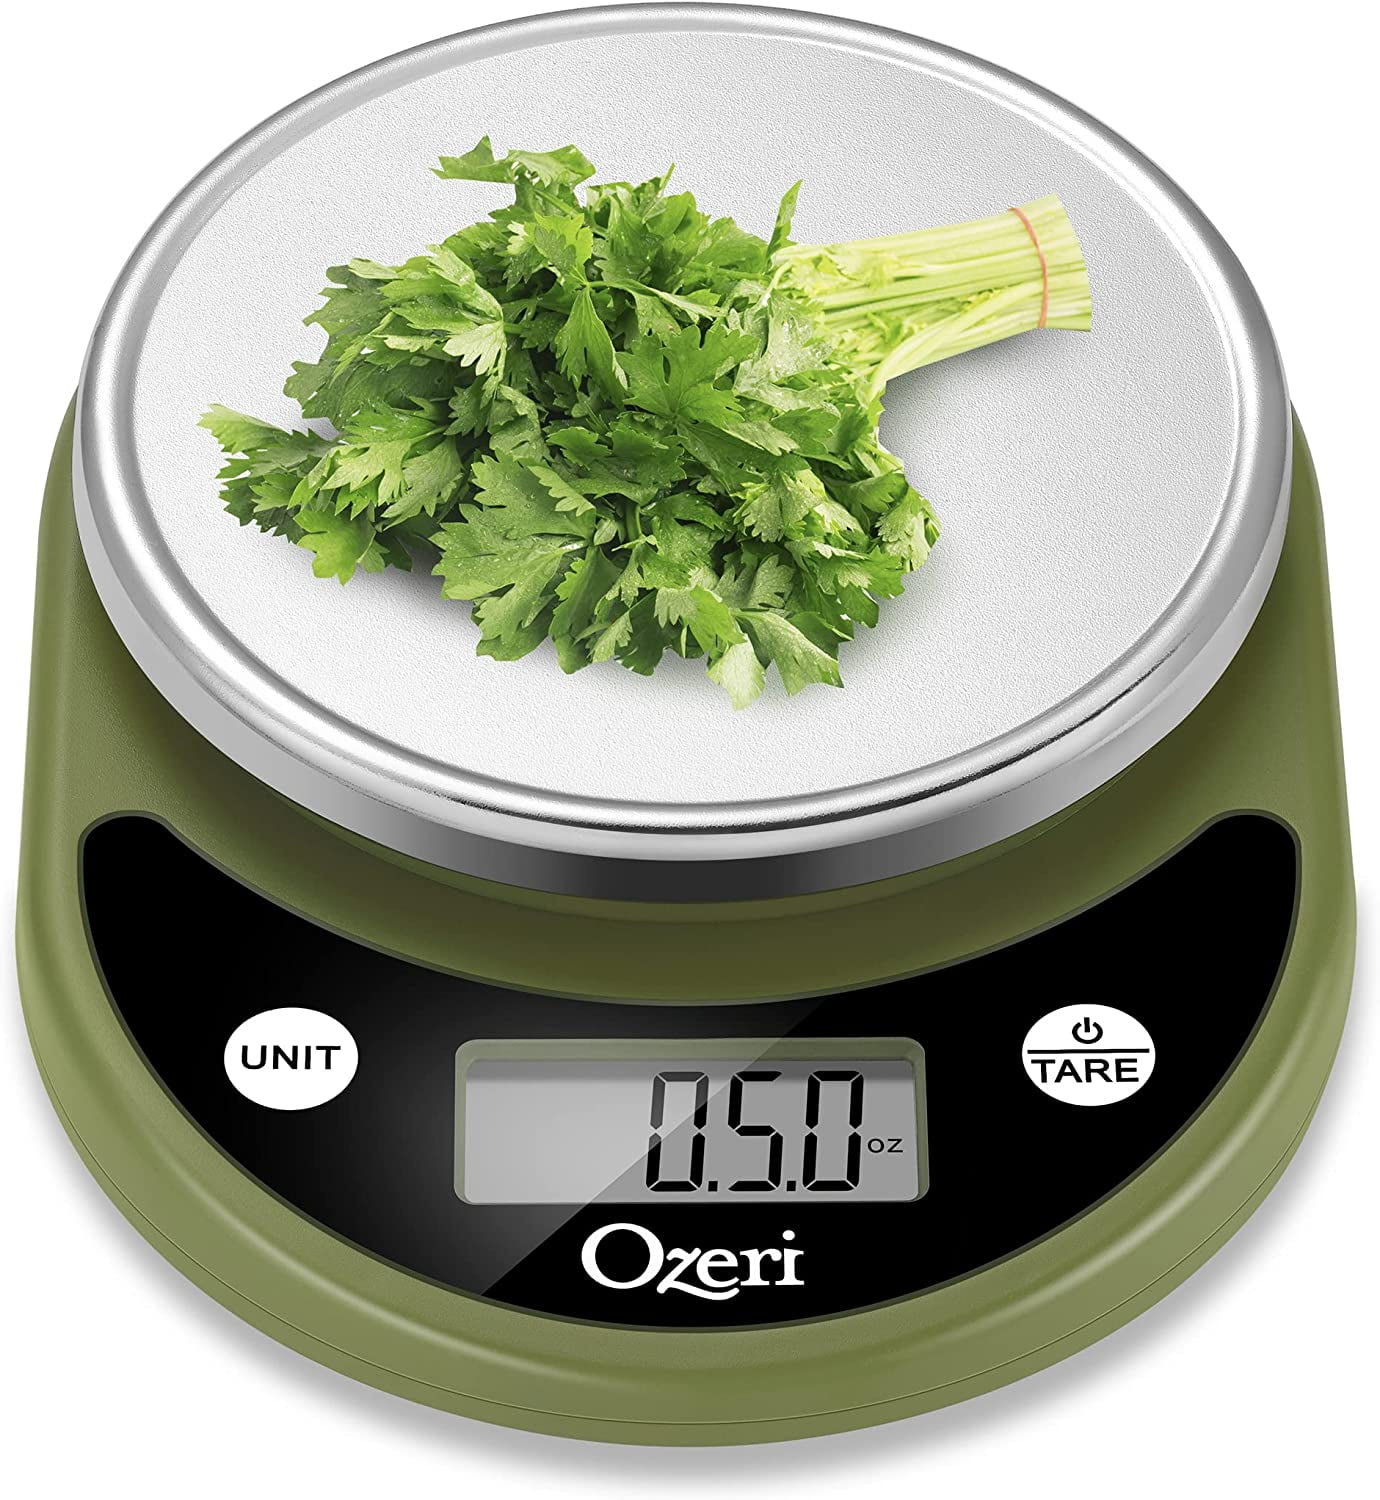 OFFICESU Digital Multifunction Kitchen and Food Scale,Silver